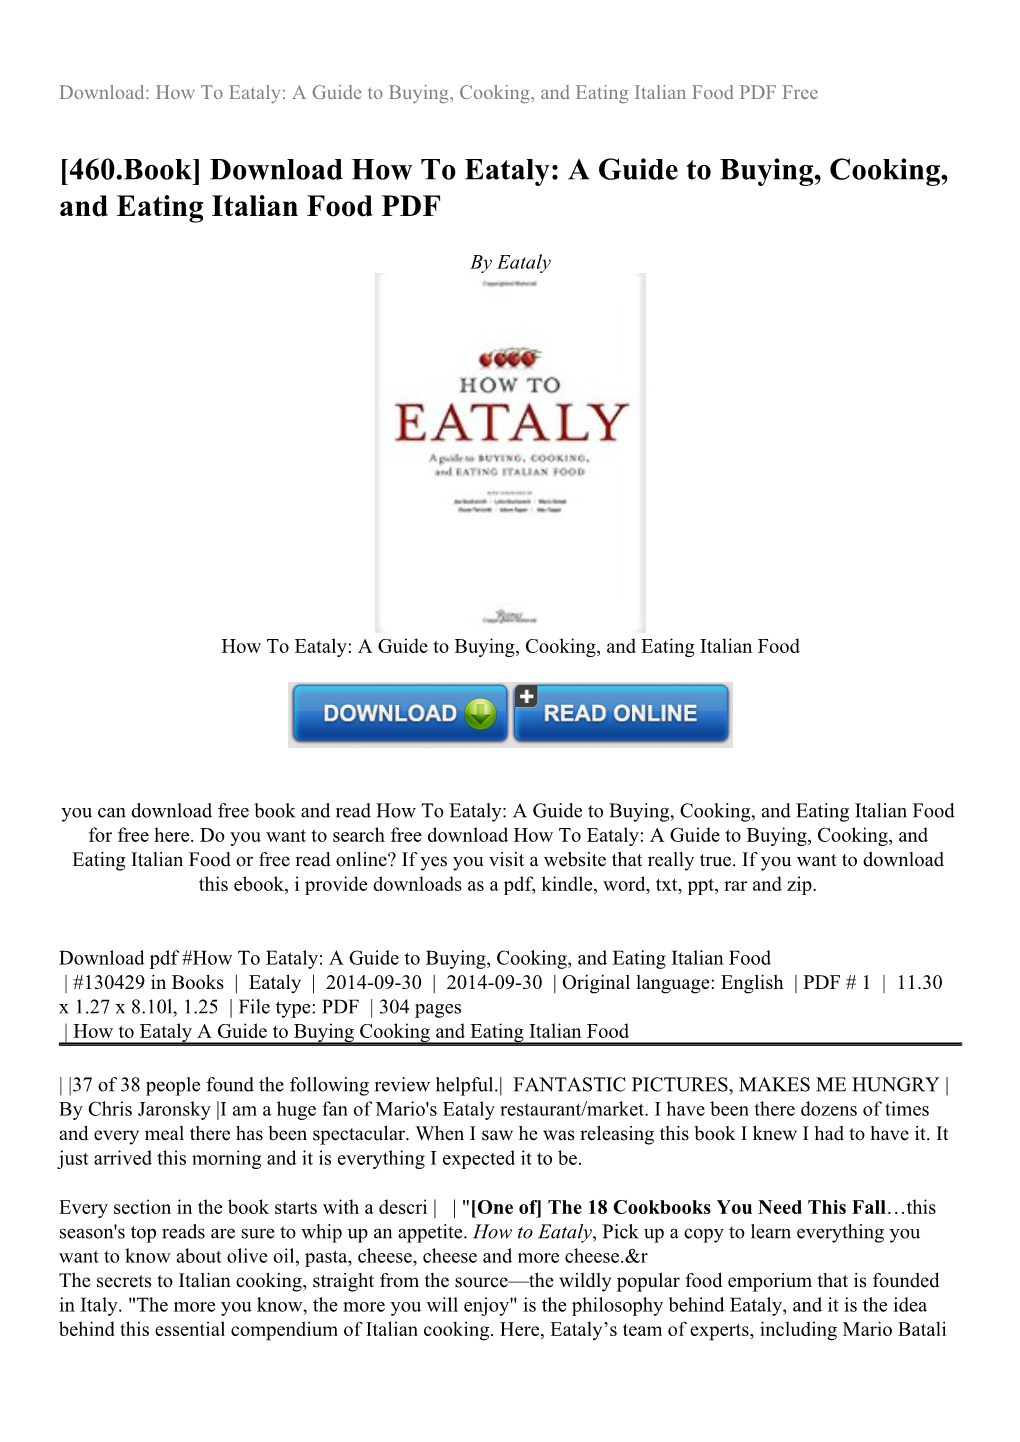 Download How to Eataly: a Guide to Buying, Cooking, and Eating Italian Food PDF